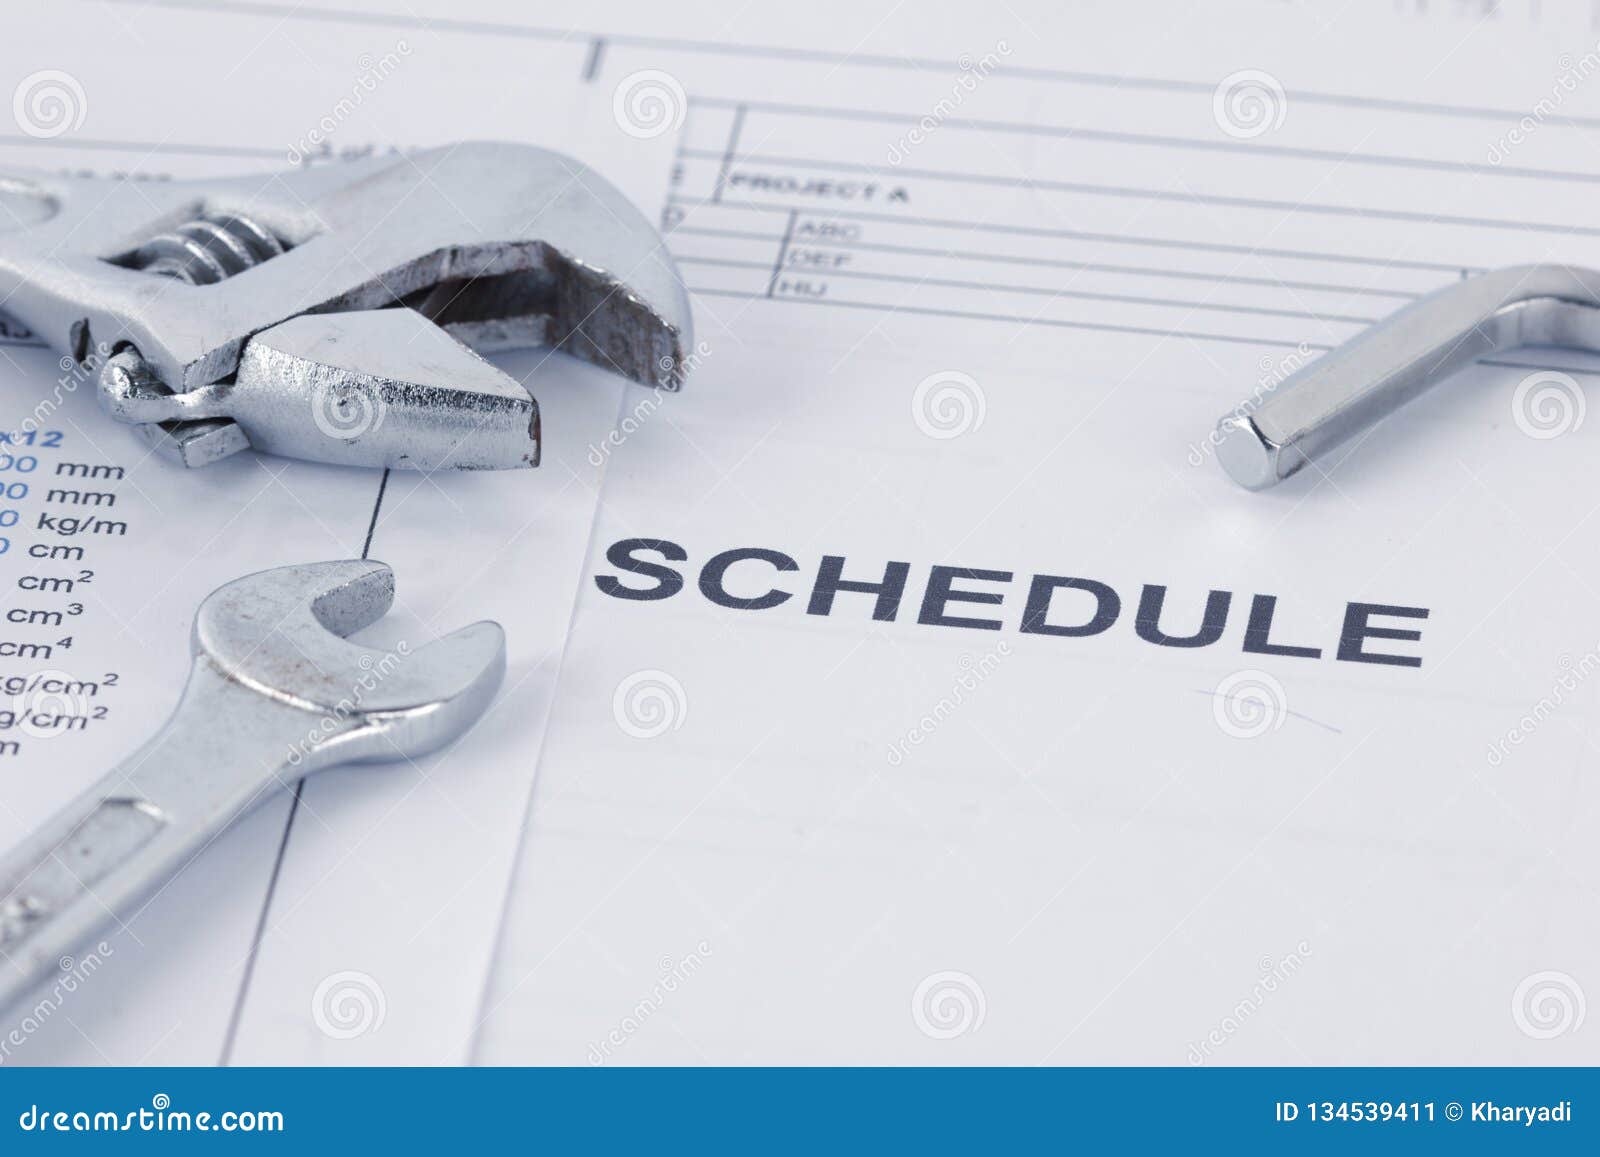 engineering schedule documents with wrench. maintencance concept